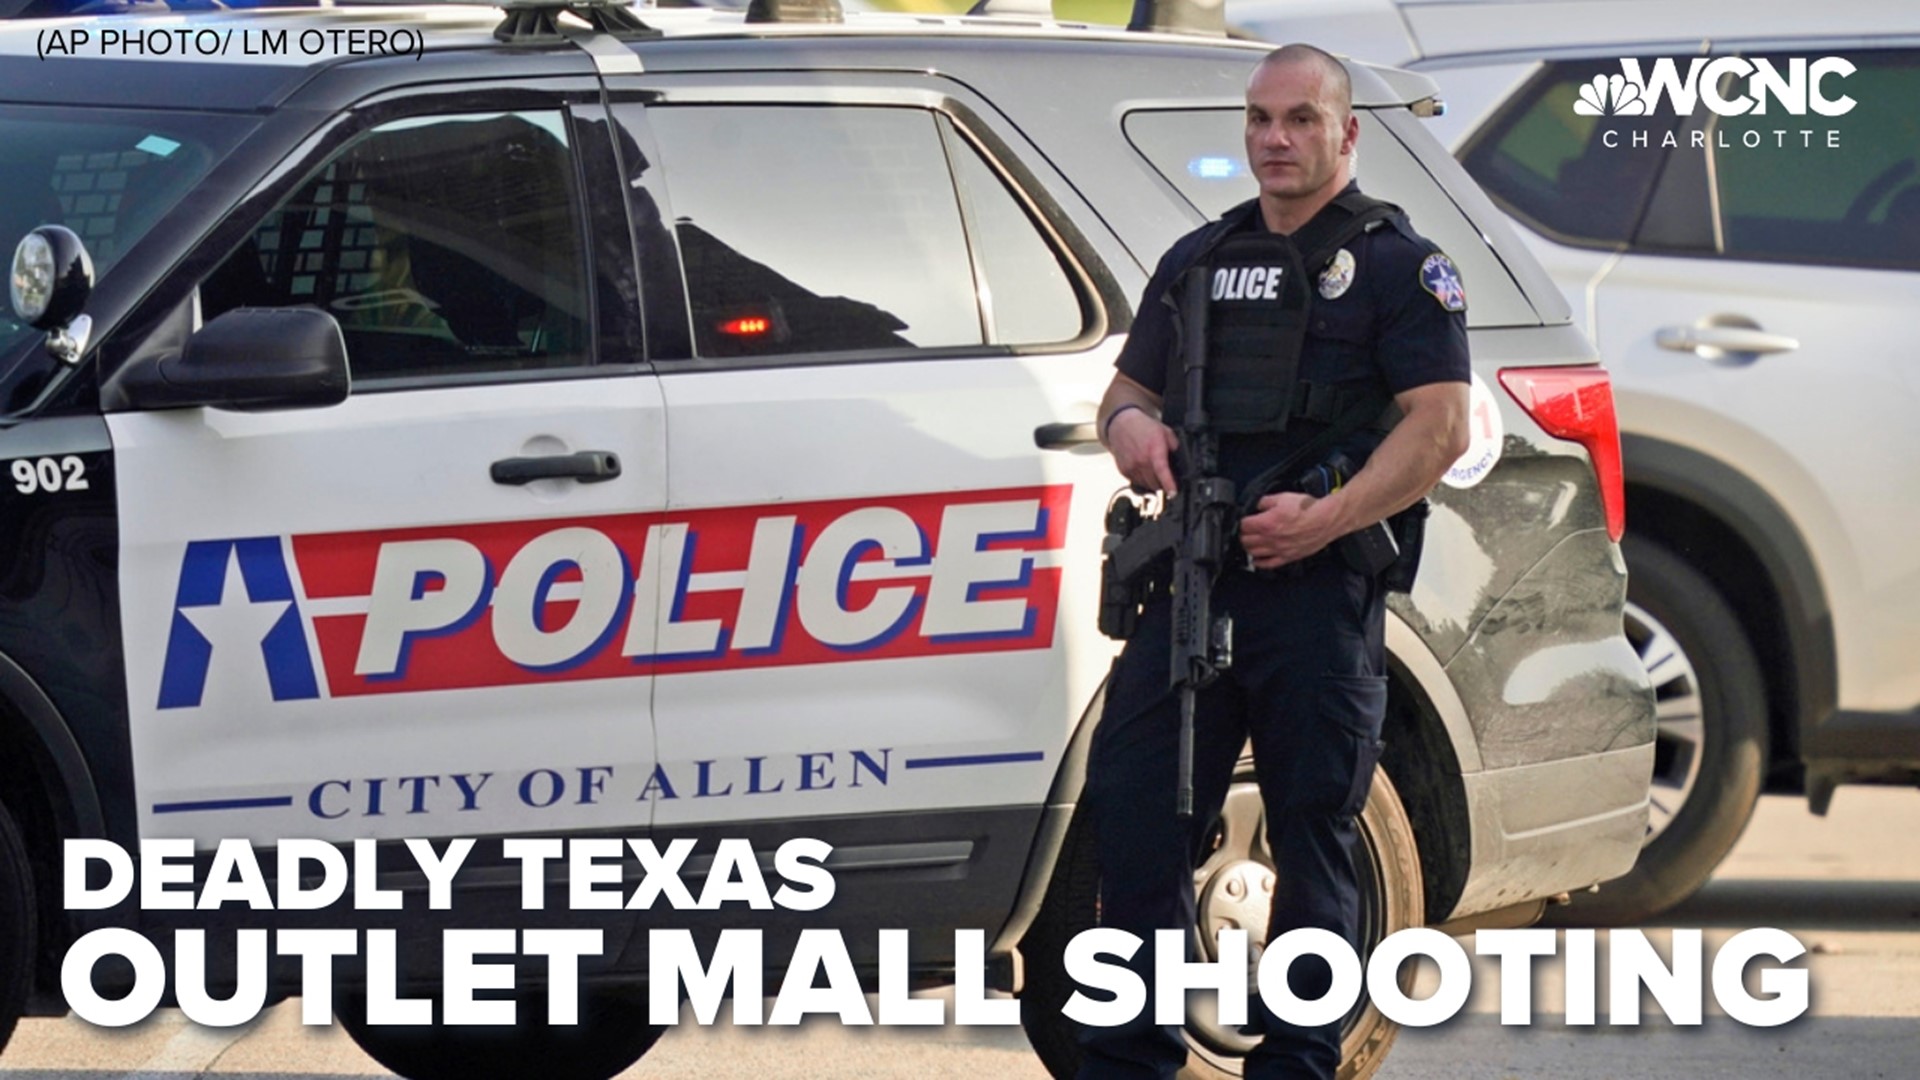 Police in Allen, Texas say nine people are dead, including the shooter.